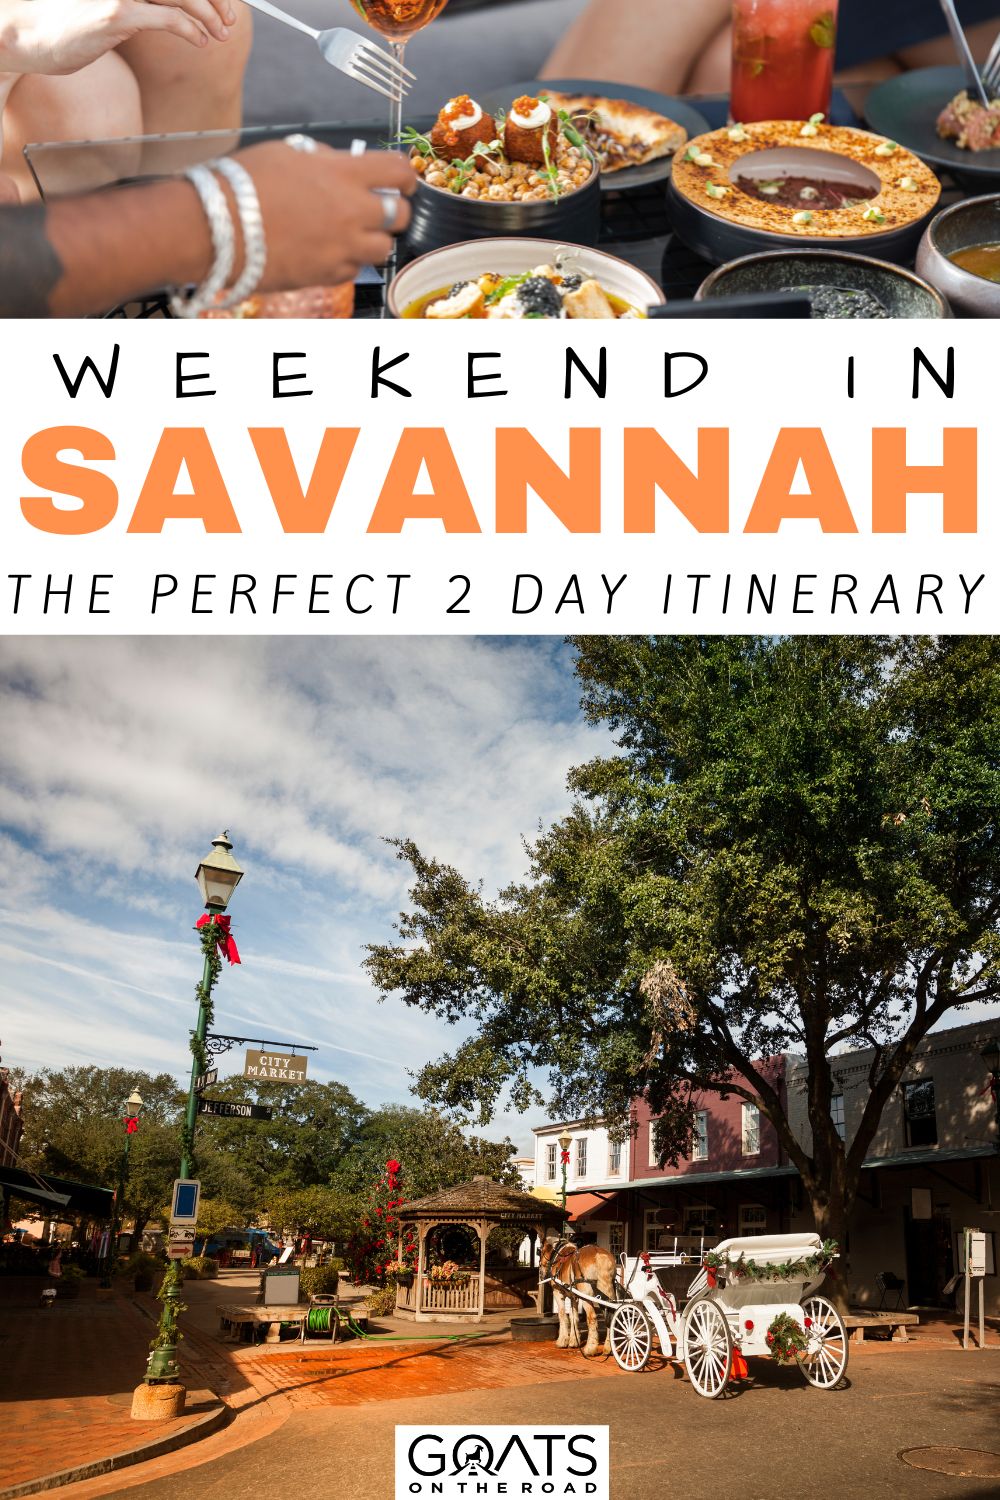 “Weekend in Savannah: The Perfect 2 Day Itinerary